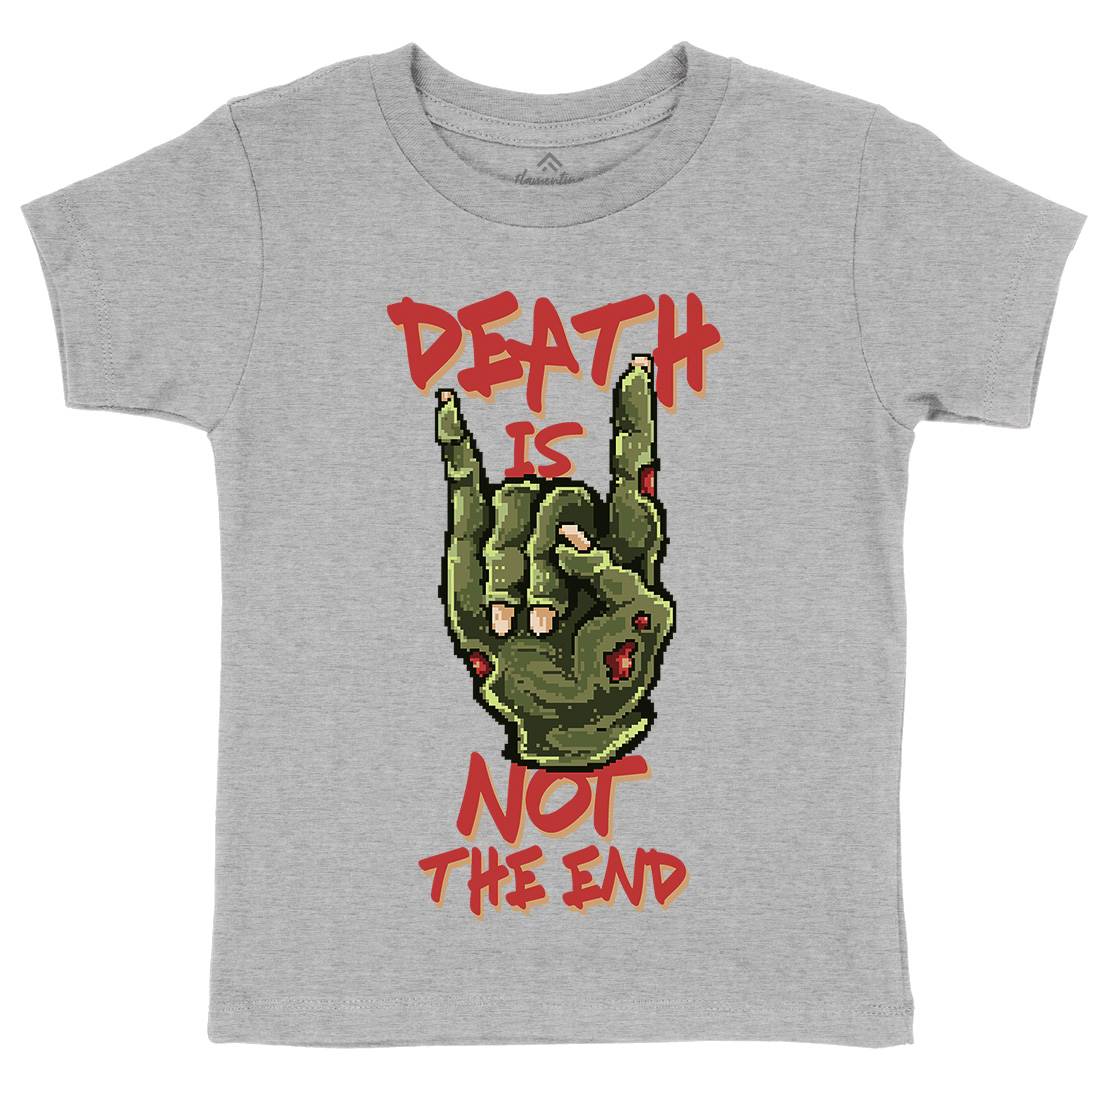 Death Is Not The End Kids Organic Crew Neck T-Shirt Horror B892